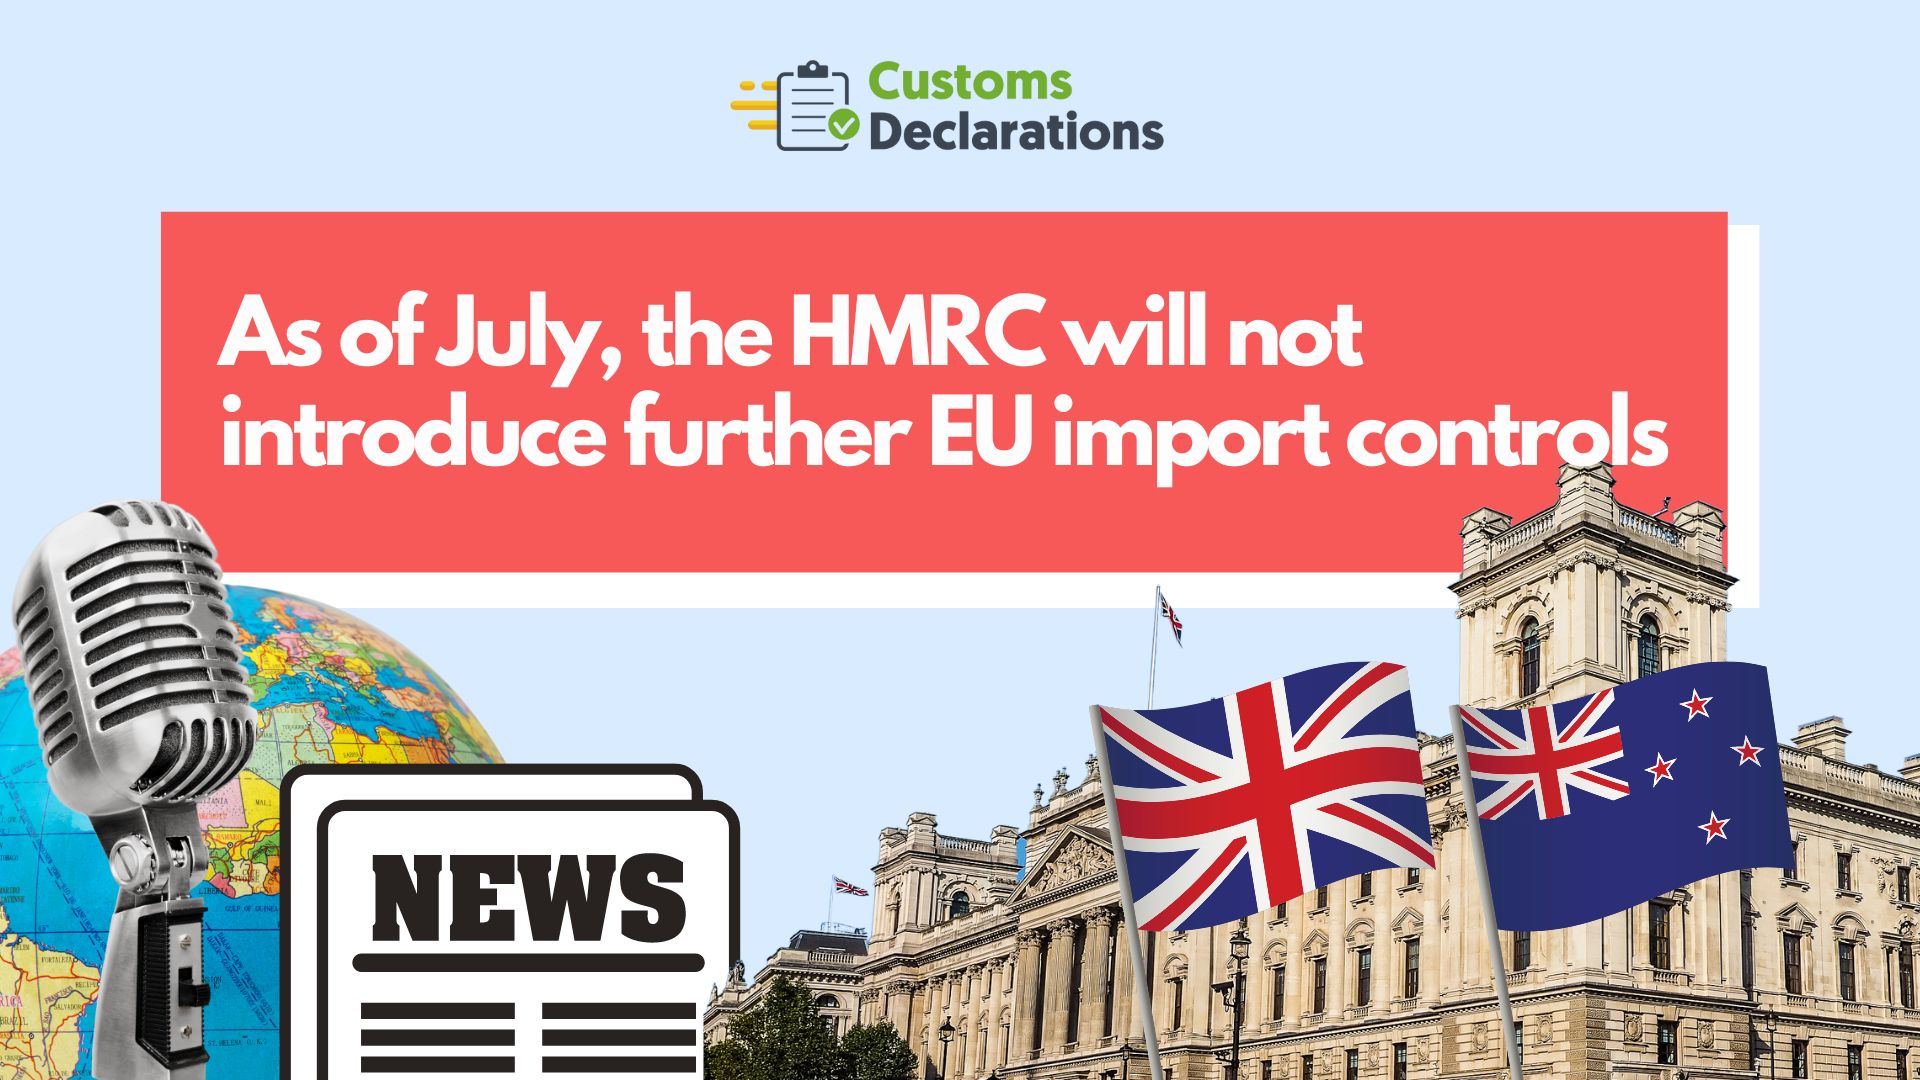 As of July, the HMRC will not introduce further EU import controls